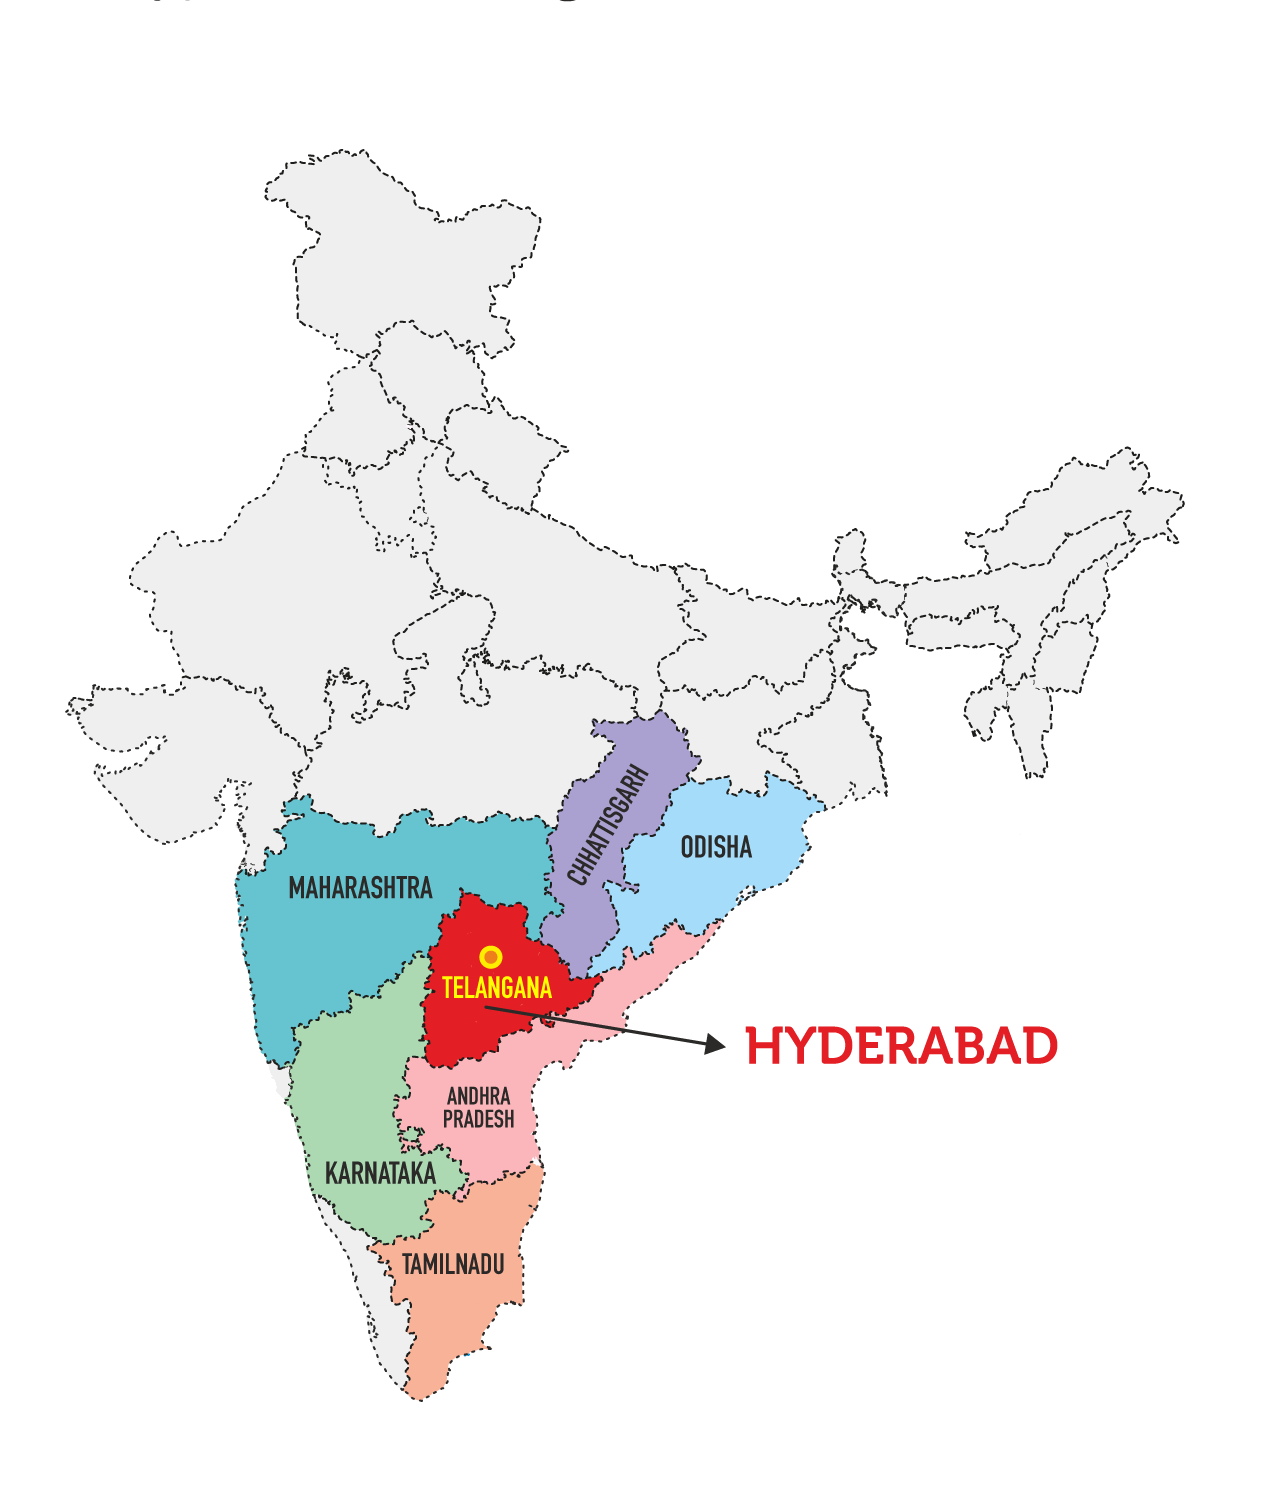 Food India Expo Exhibition in Hyderabad Map